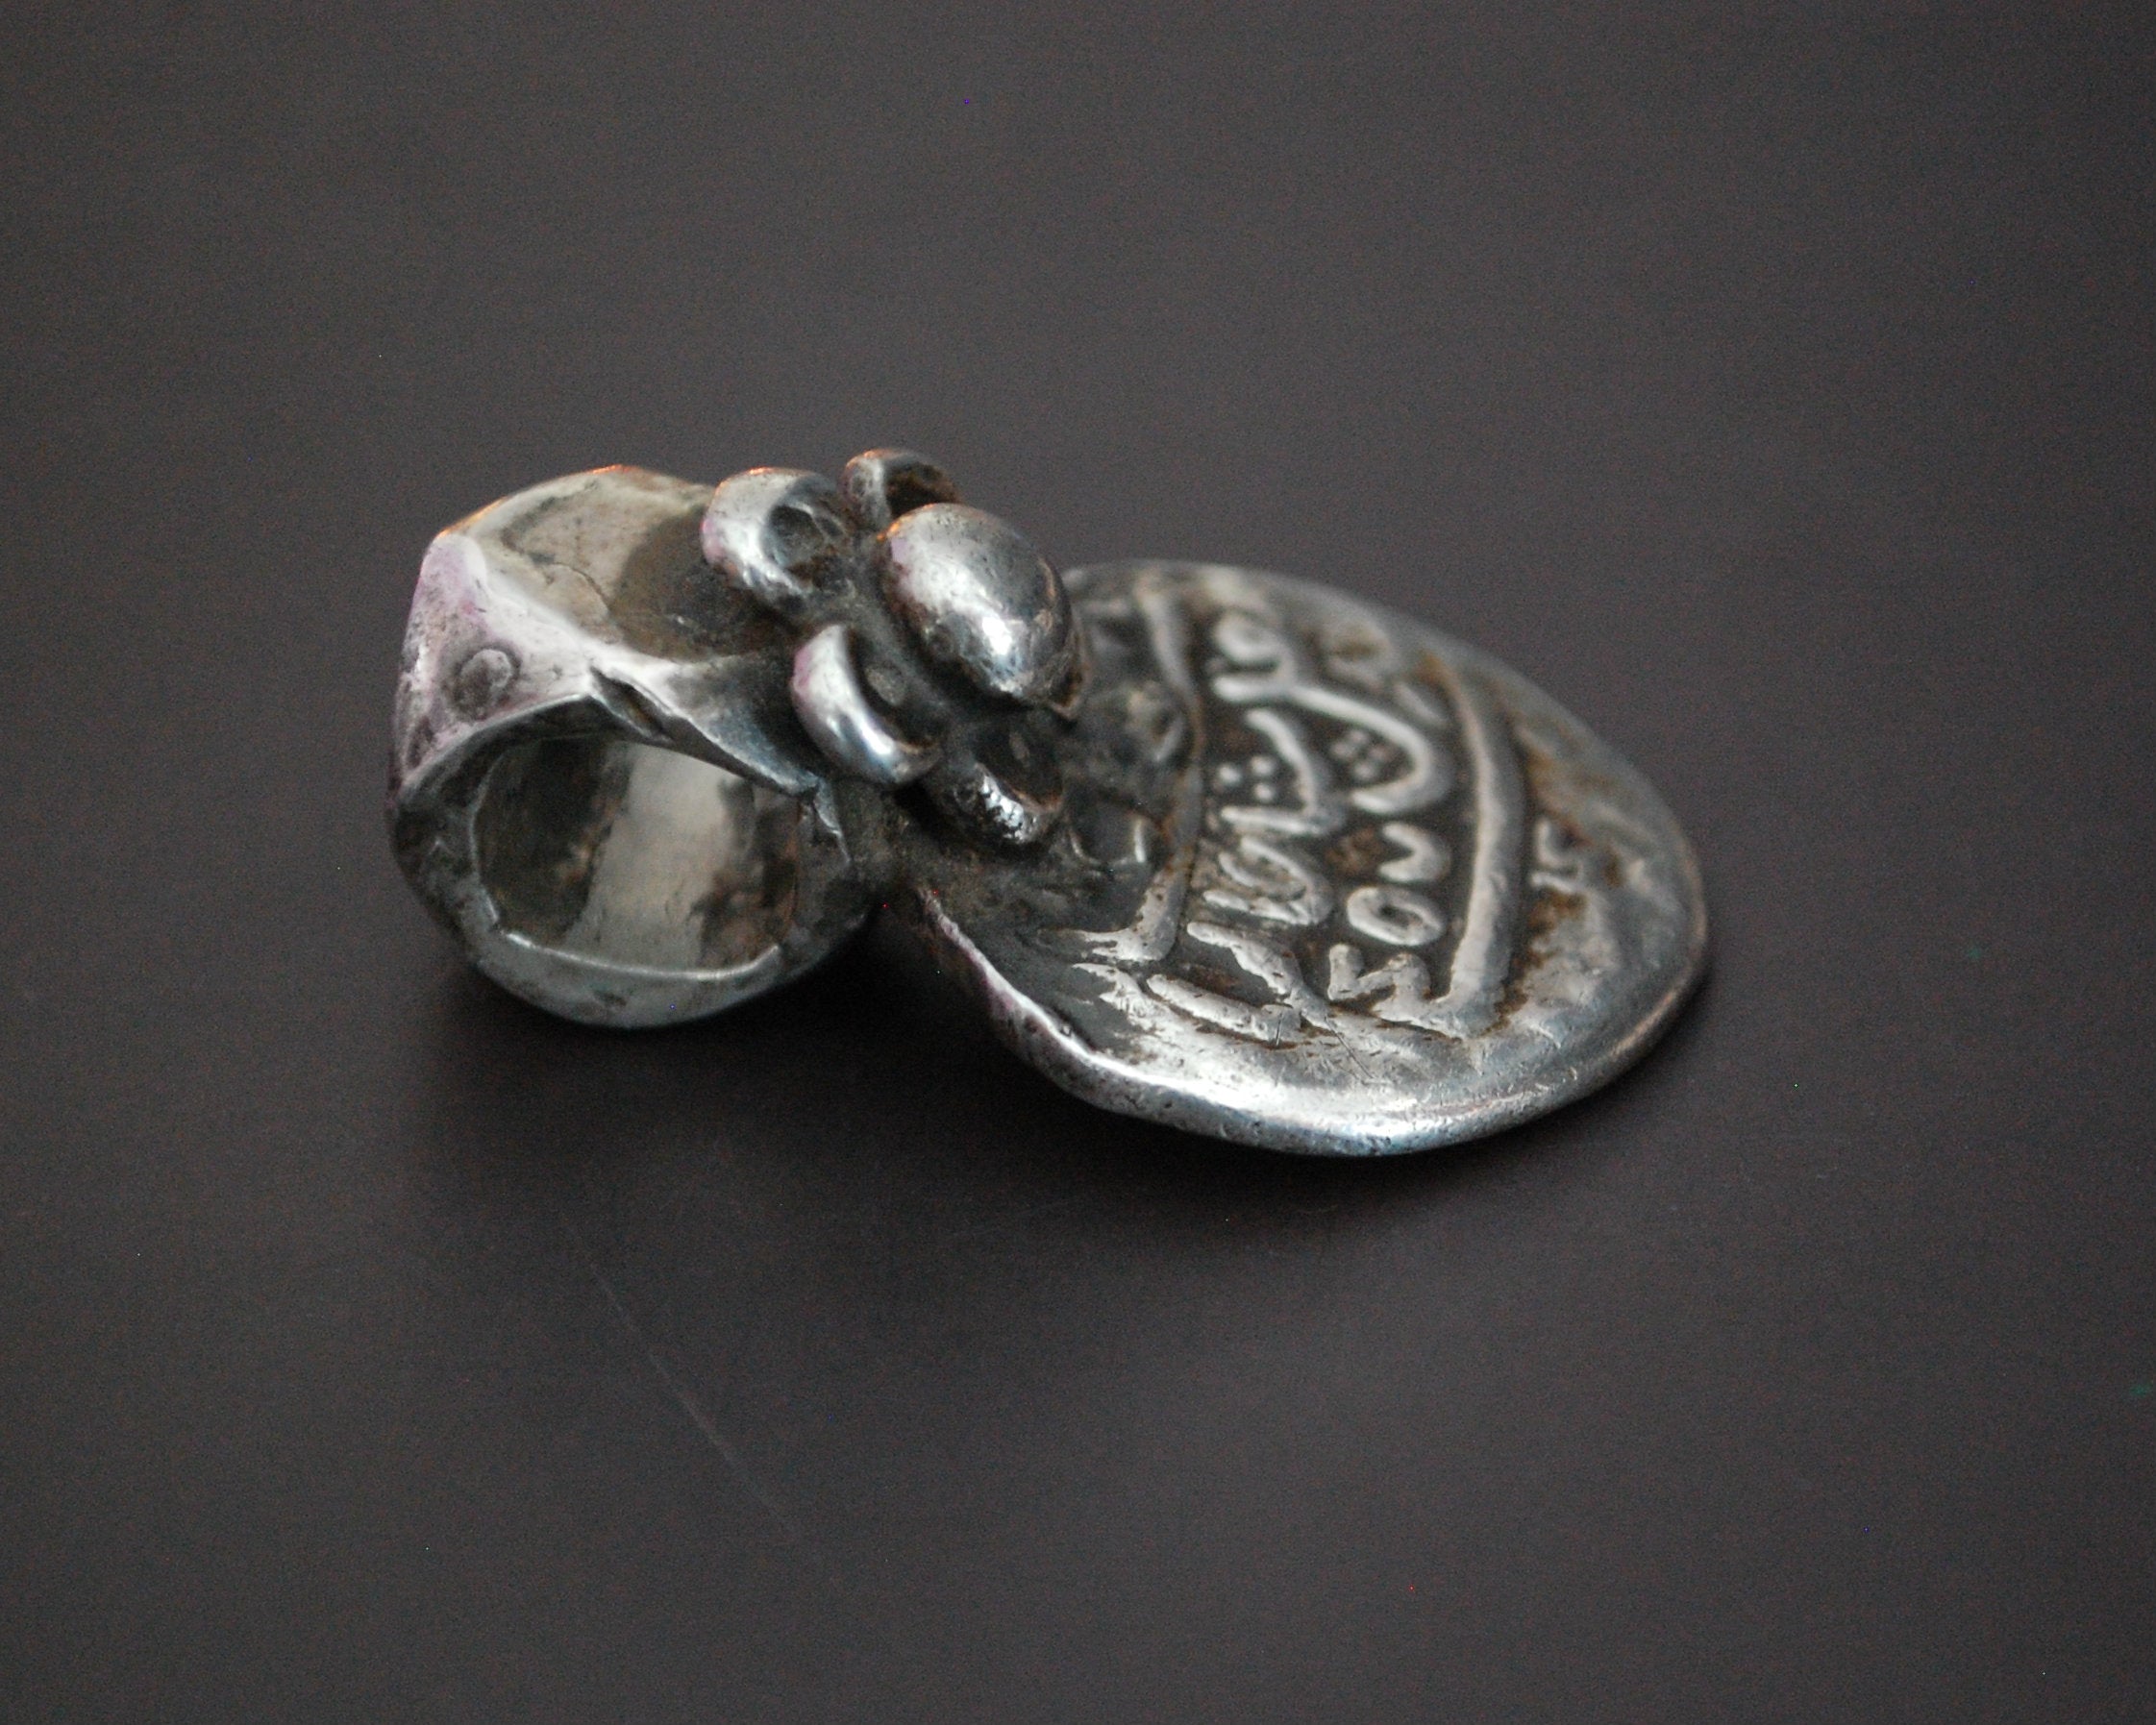 Antique Indian Mughal Coin Pendant